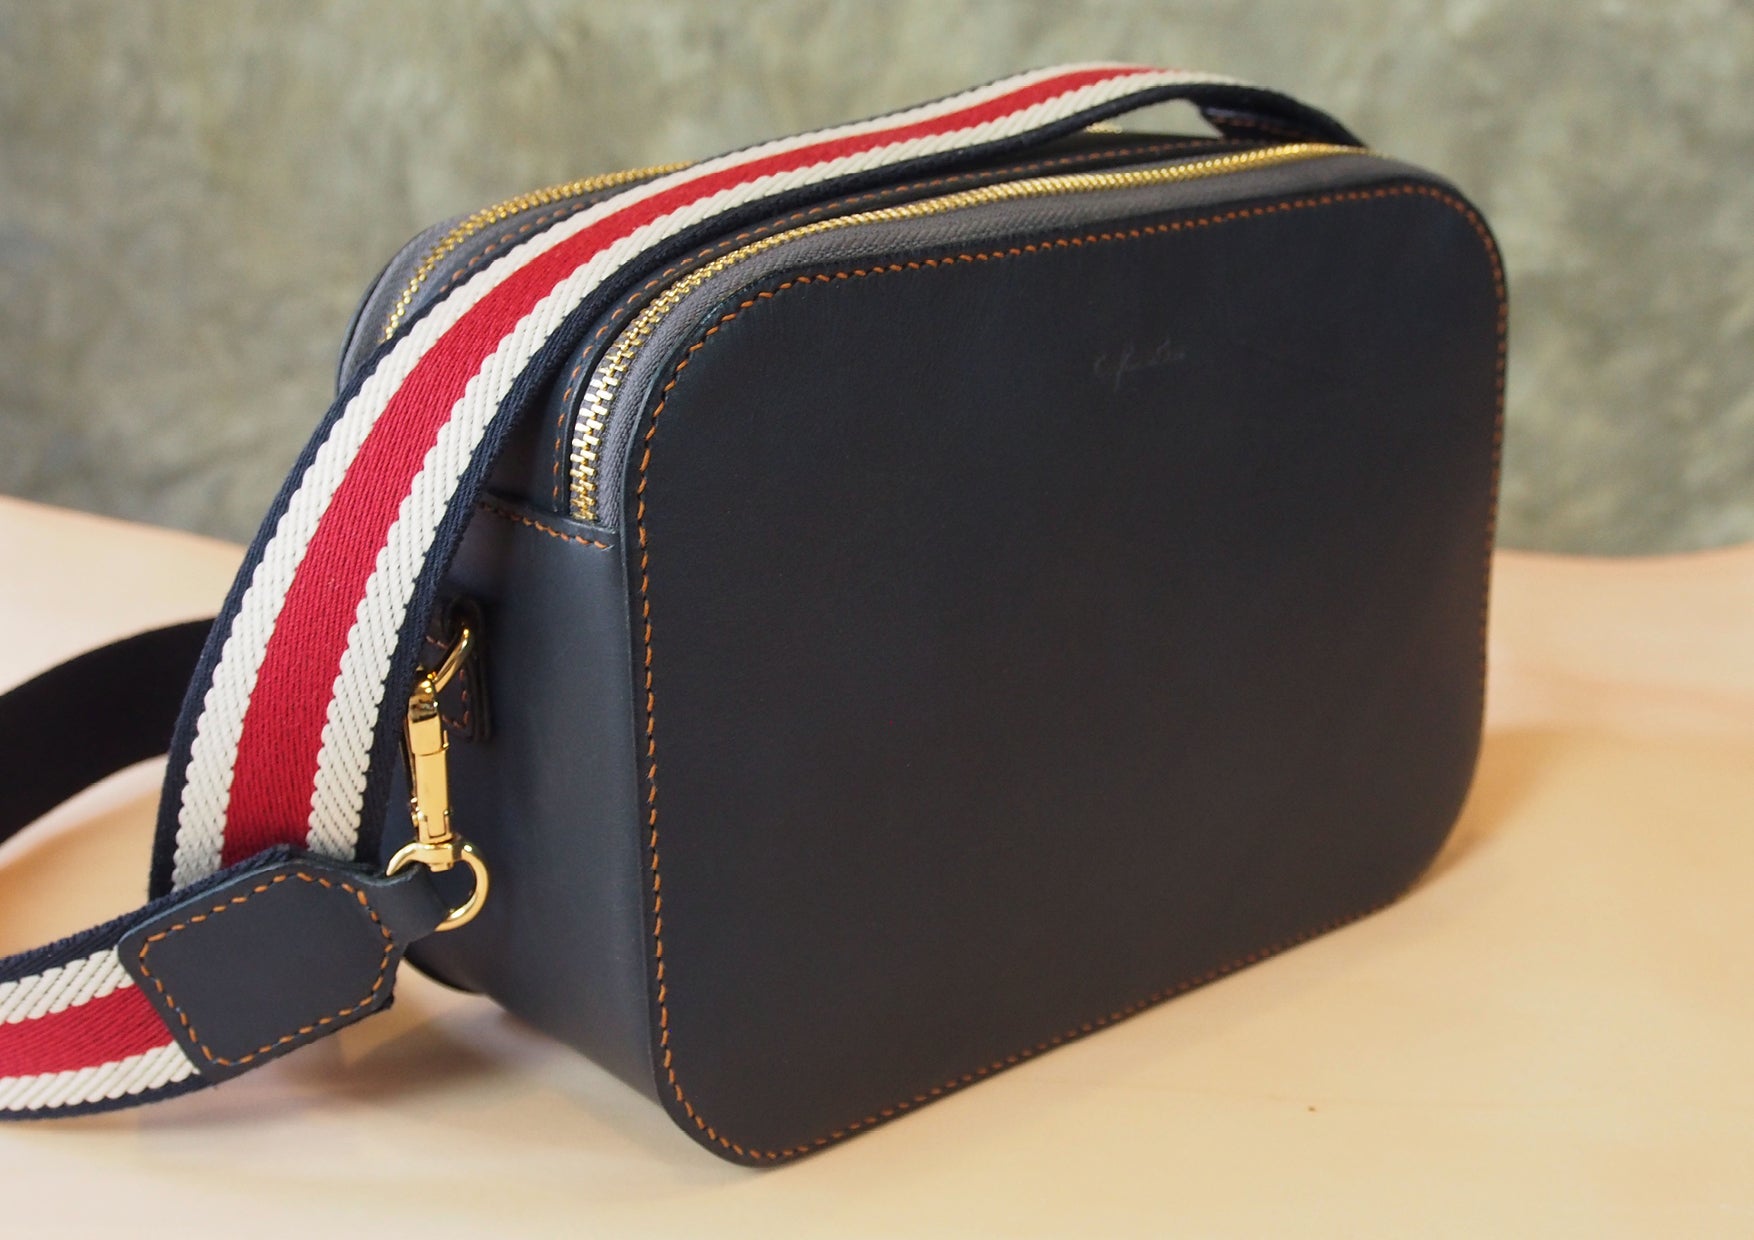 Leather Toaster Bag Pattern